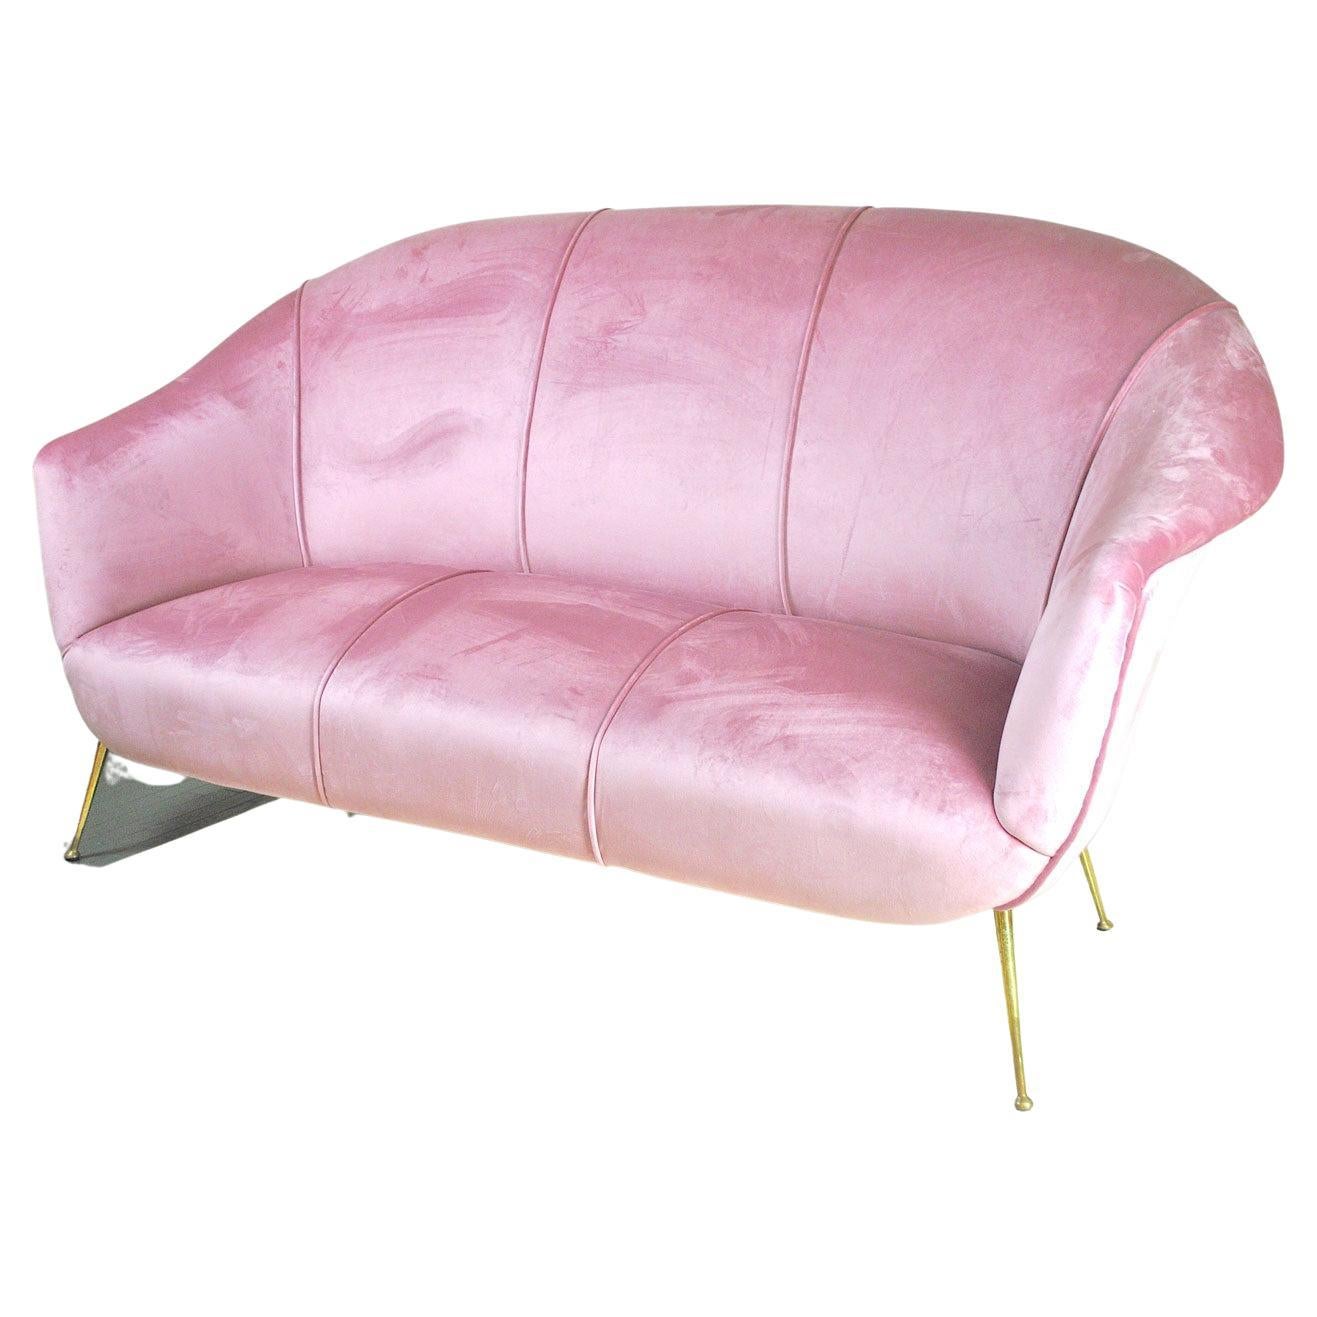 Ico Parisi Italian Sofa Early 1960s in Pink Velvet and Brass Feet For Sale